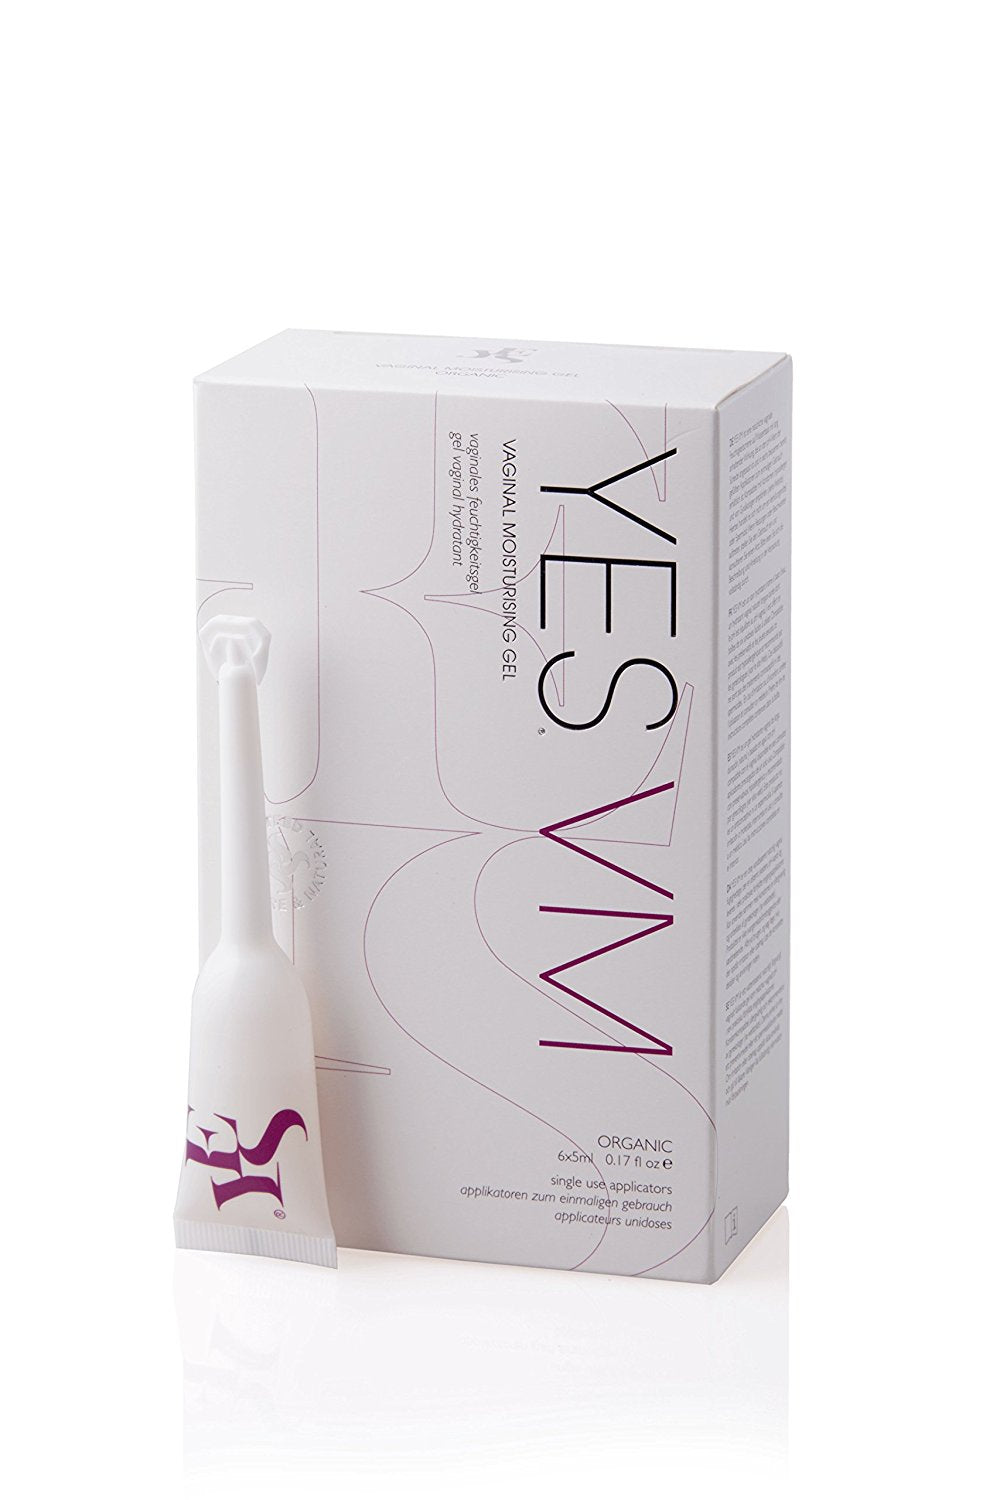 The Water-Vaginal Moisturising Gel in applicator format has been formulated to help with vaginal atrophy and itching and burning from vulva dryness.